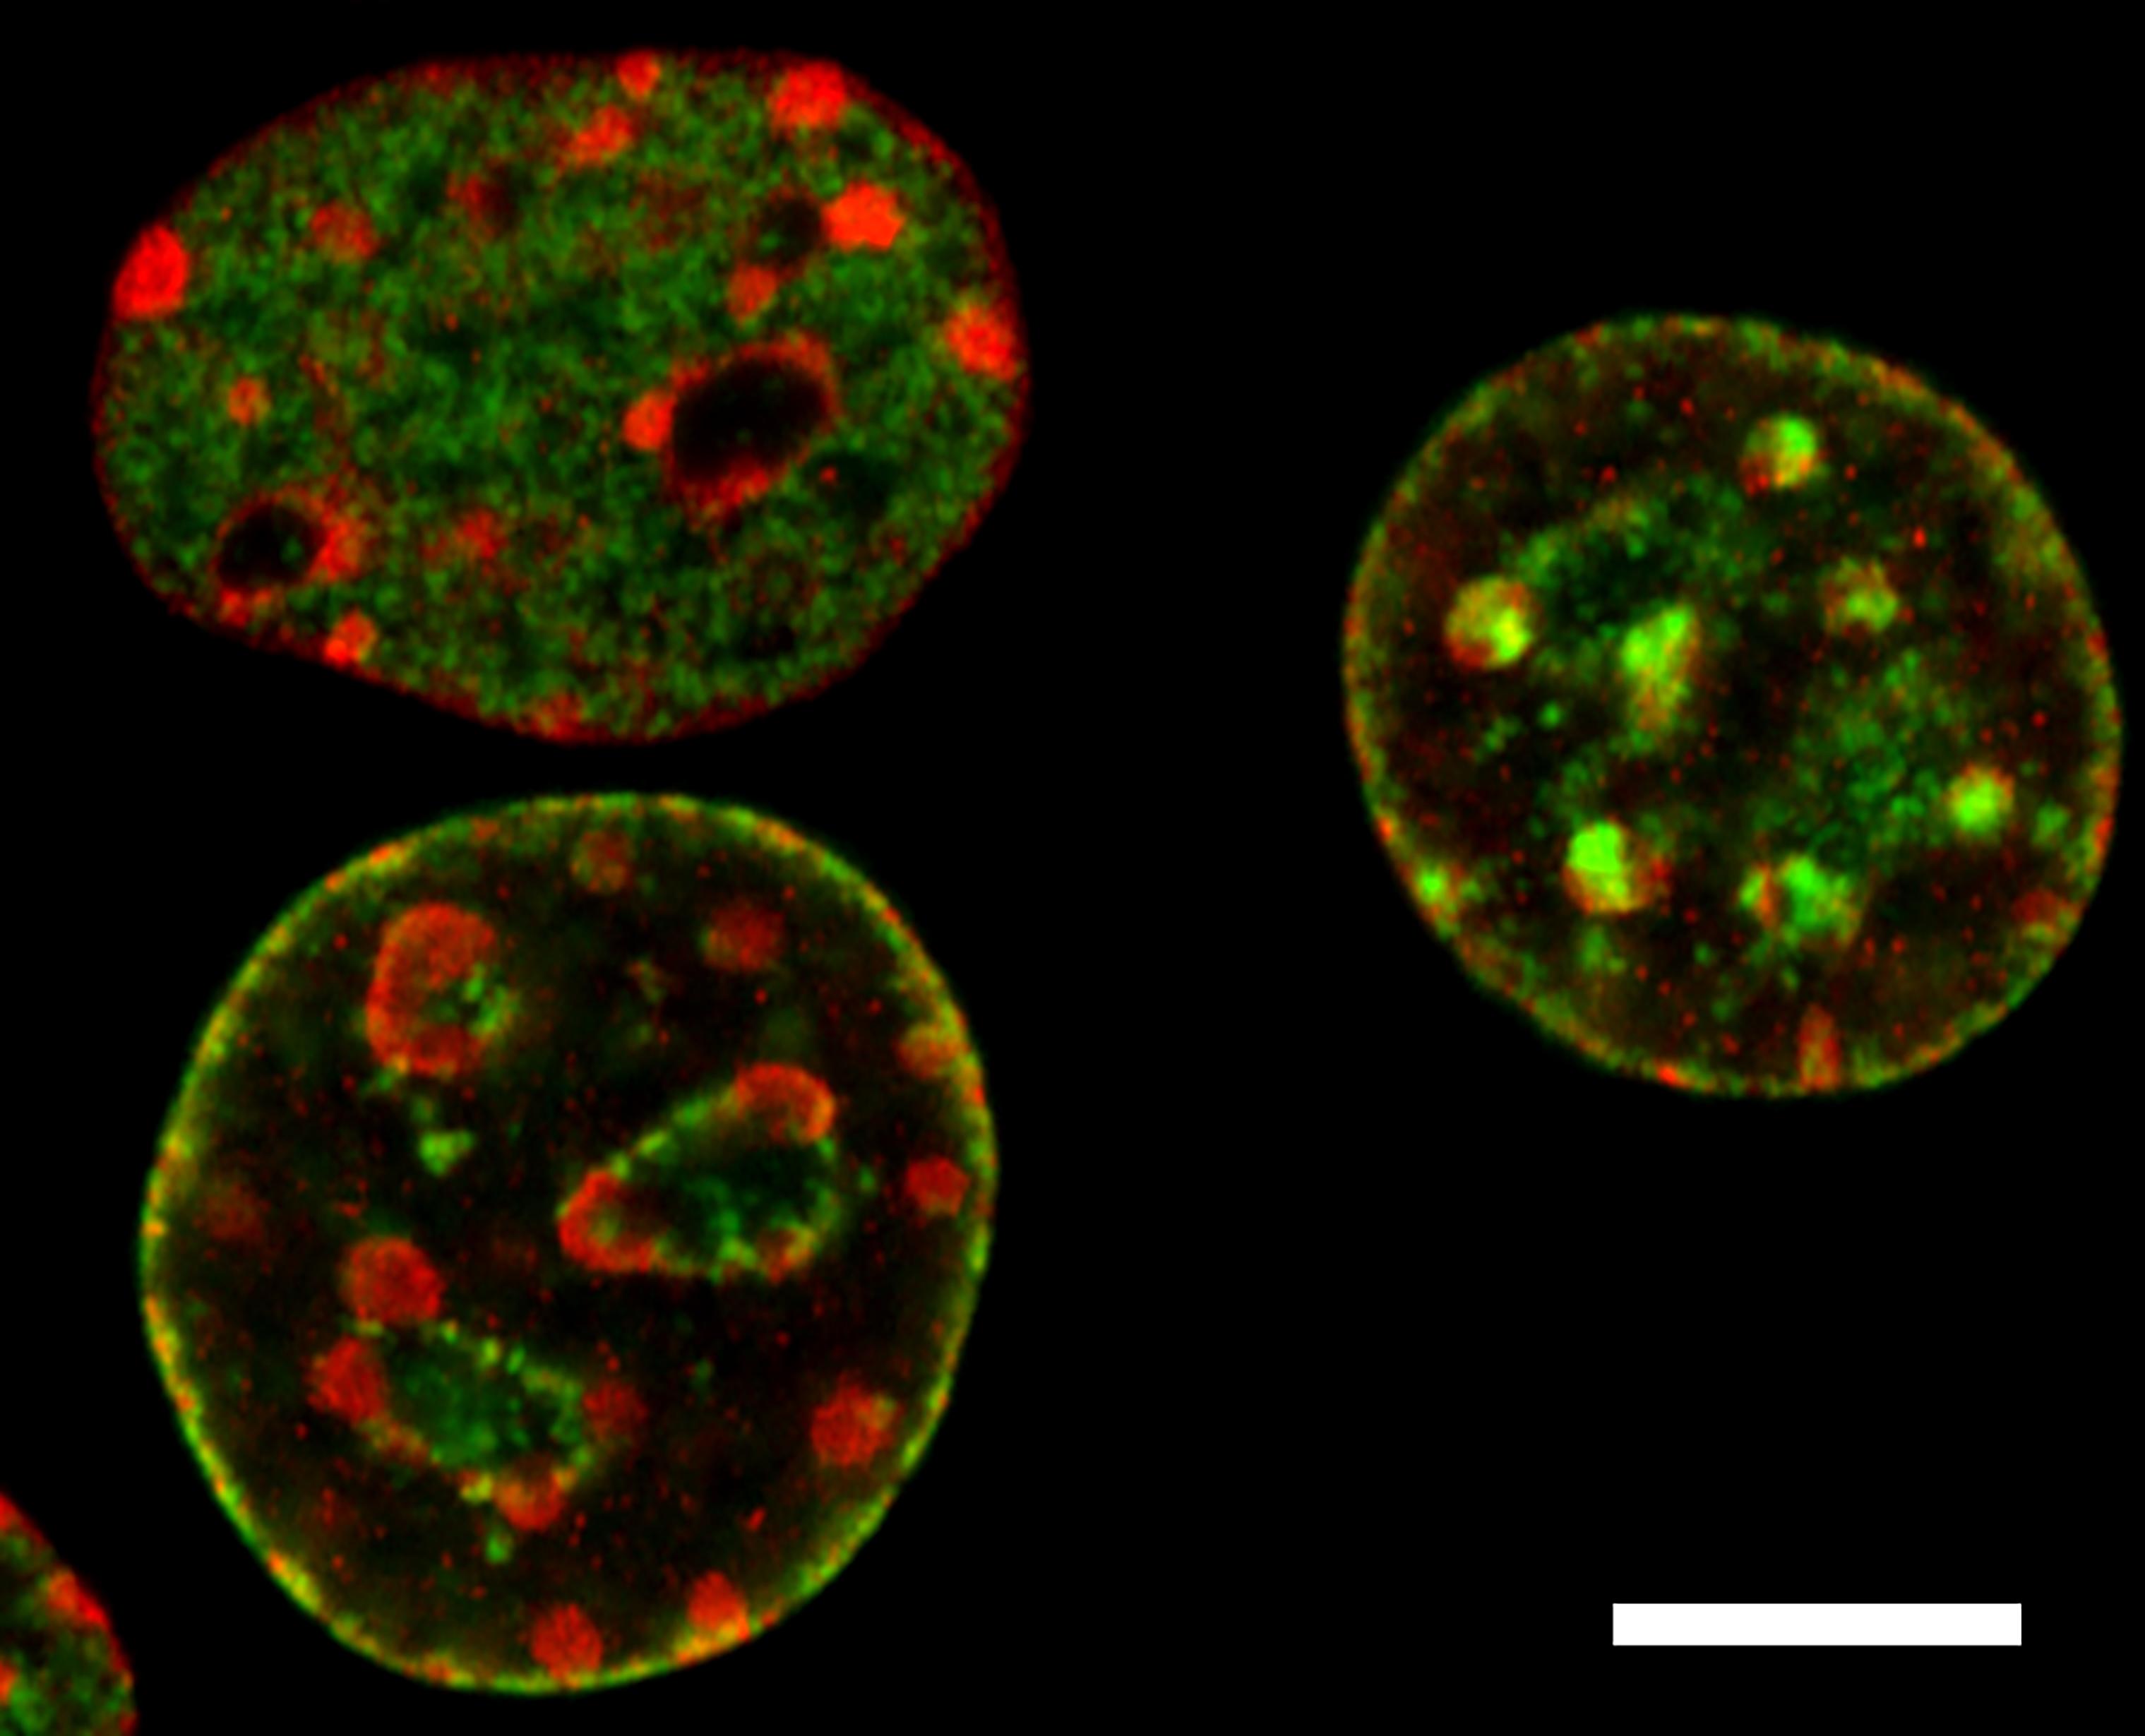 Super-resolution light microscopy images of metastatic tumor cell nuclei immunolabeled against histone post-translational modifications (H3K9me3, red) and histone variants (H3.1, green).